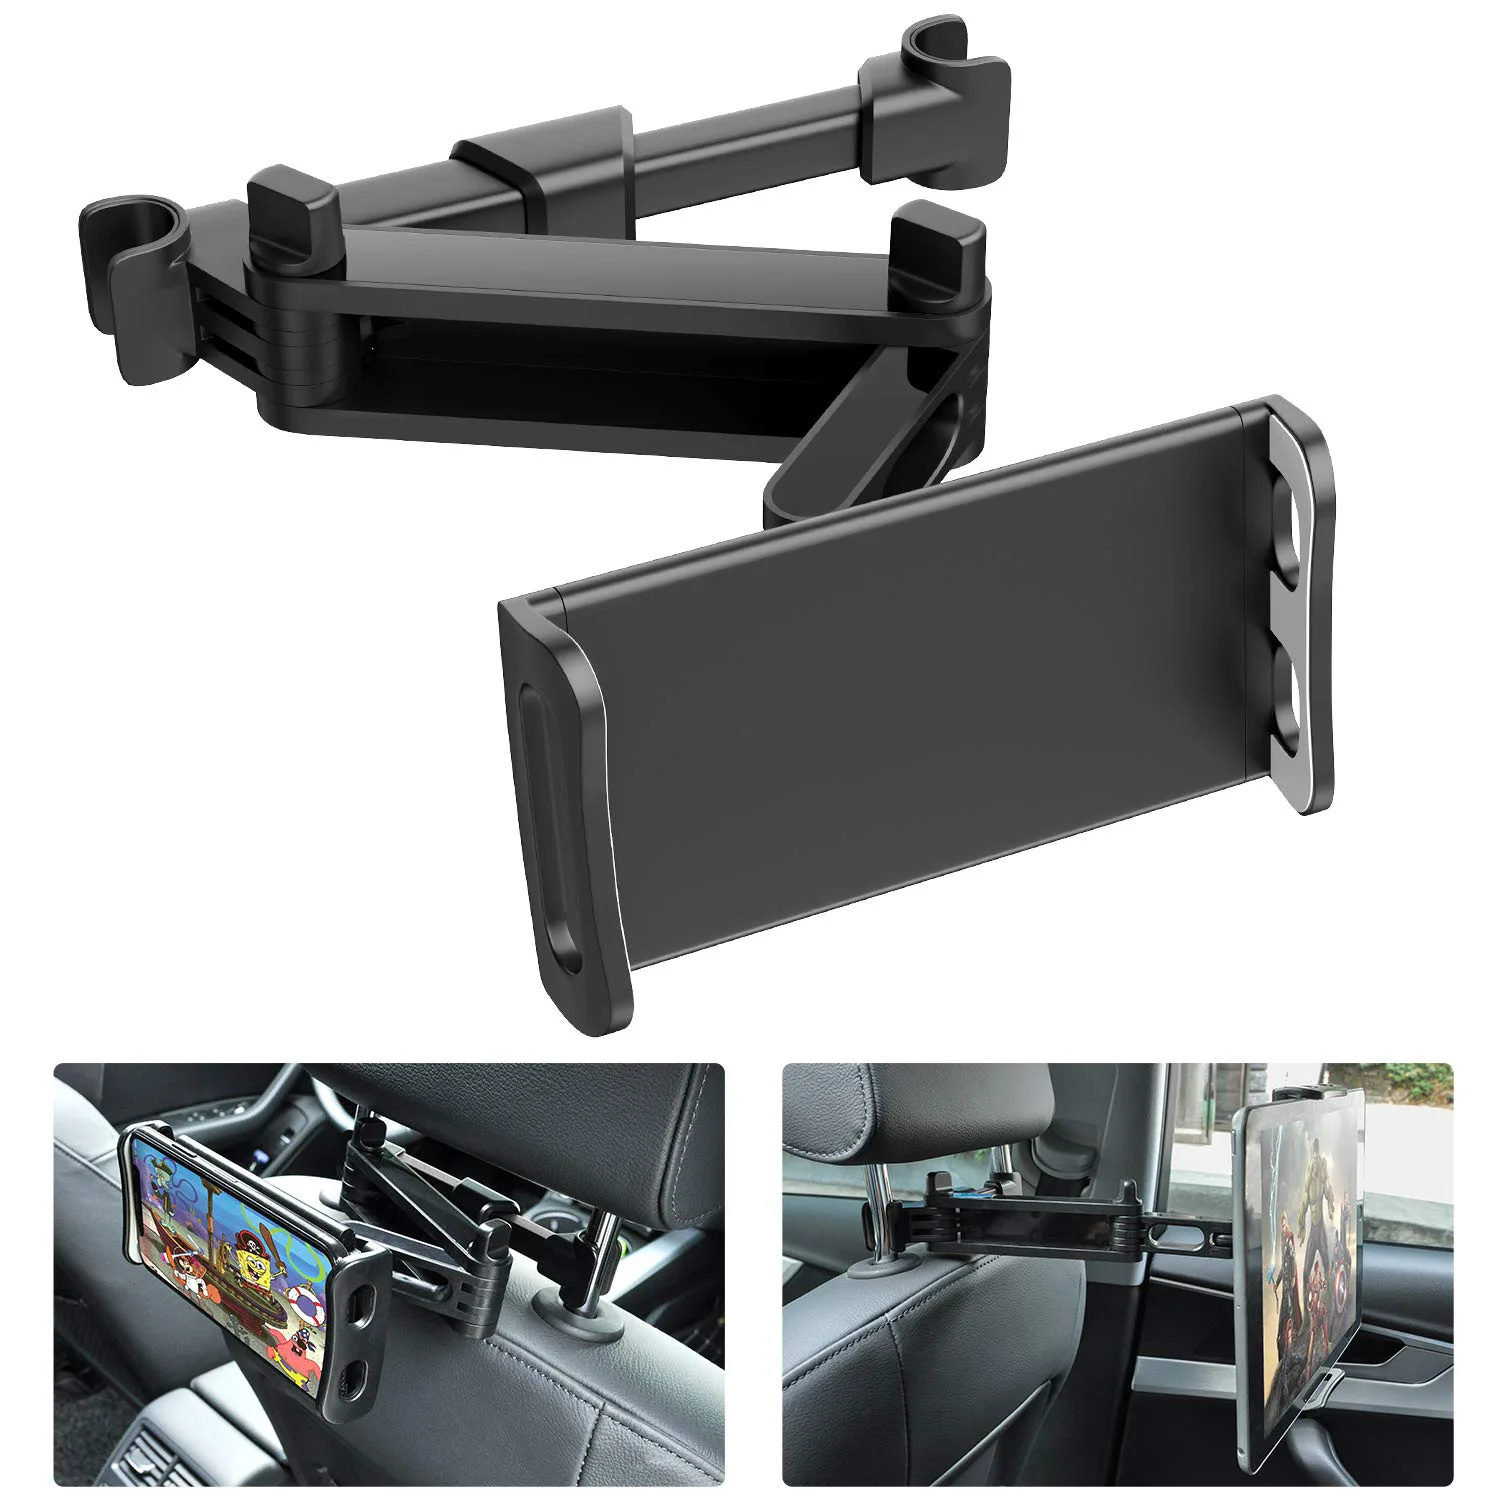 EAFC Telescopic Car Rear Pillow Phone Holder Tablet Car Stand Seat Rear Headrest Mounting Bracket for Phone Tablet 4-11 Inch 6